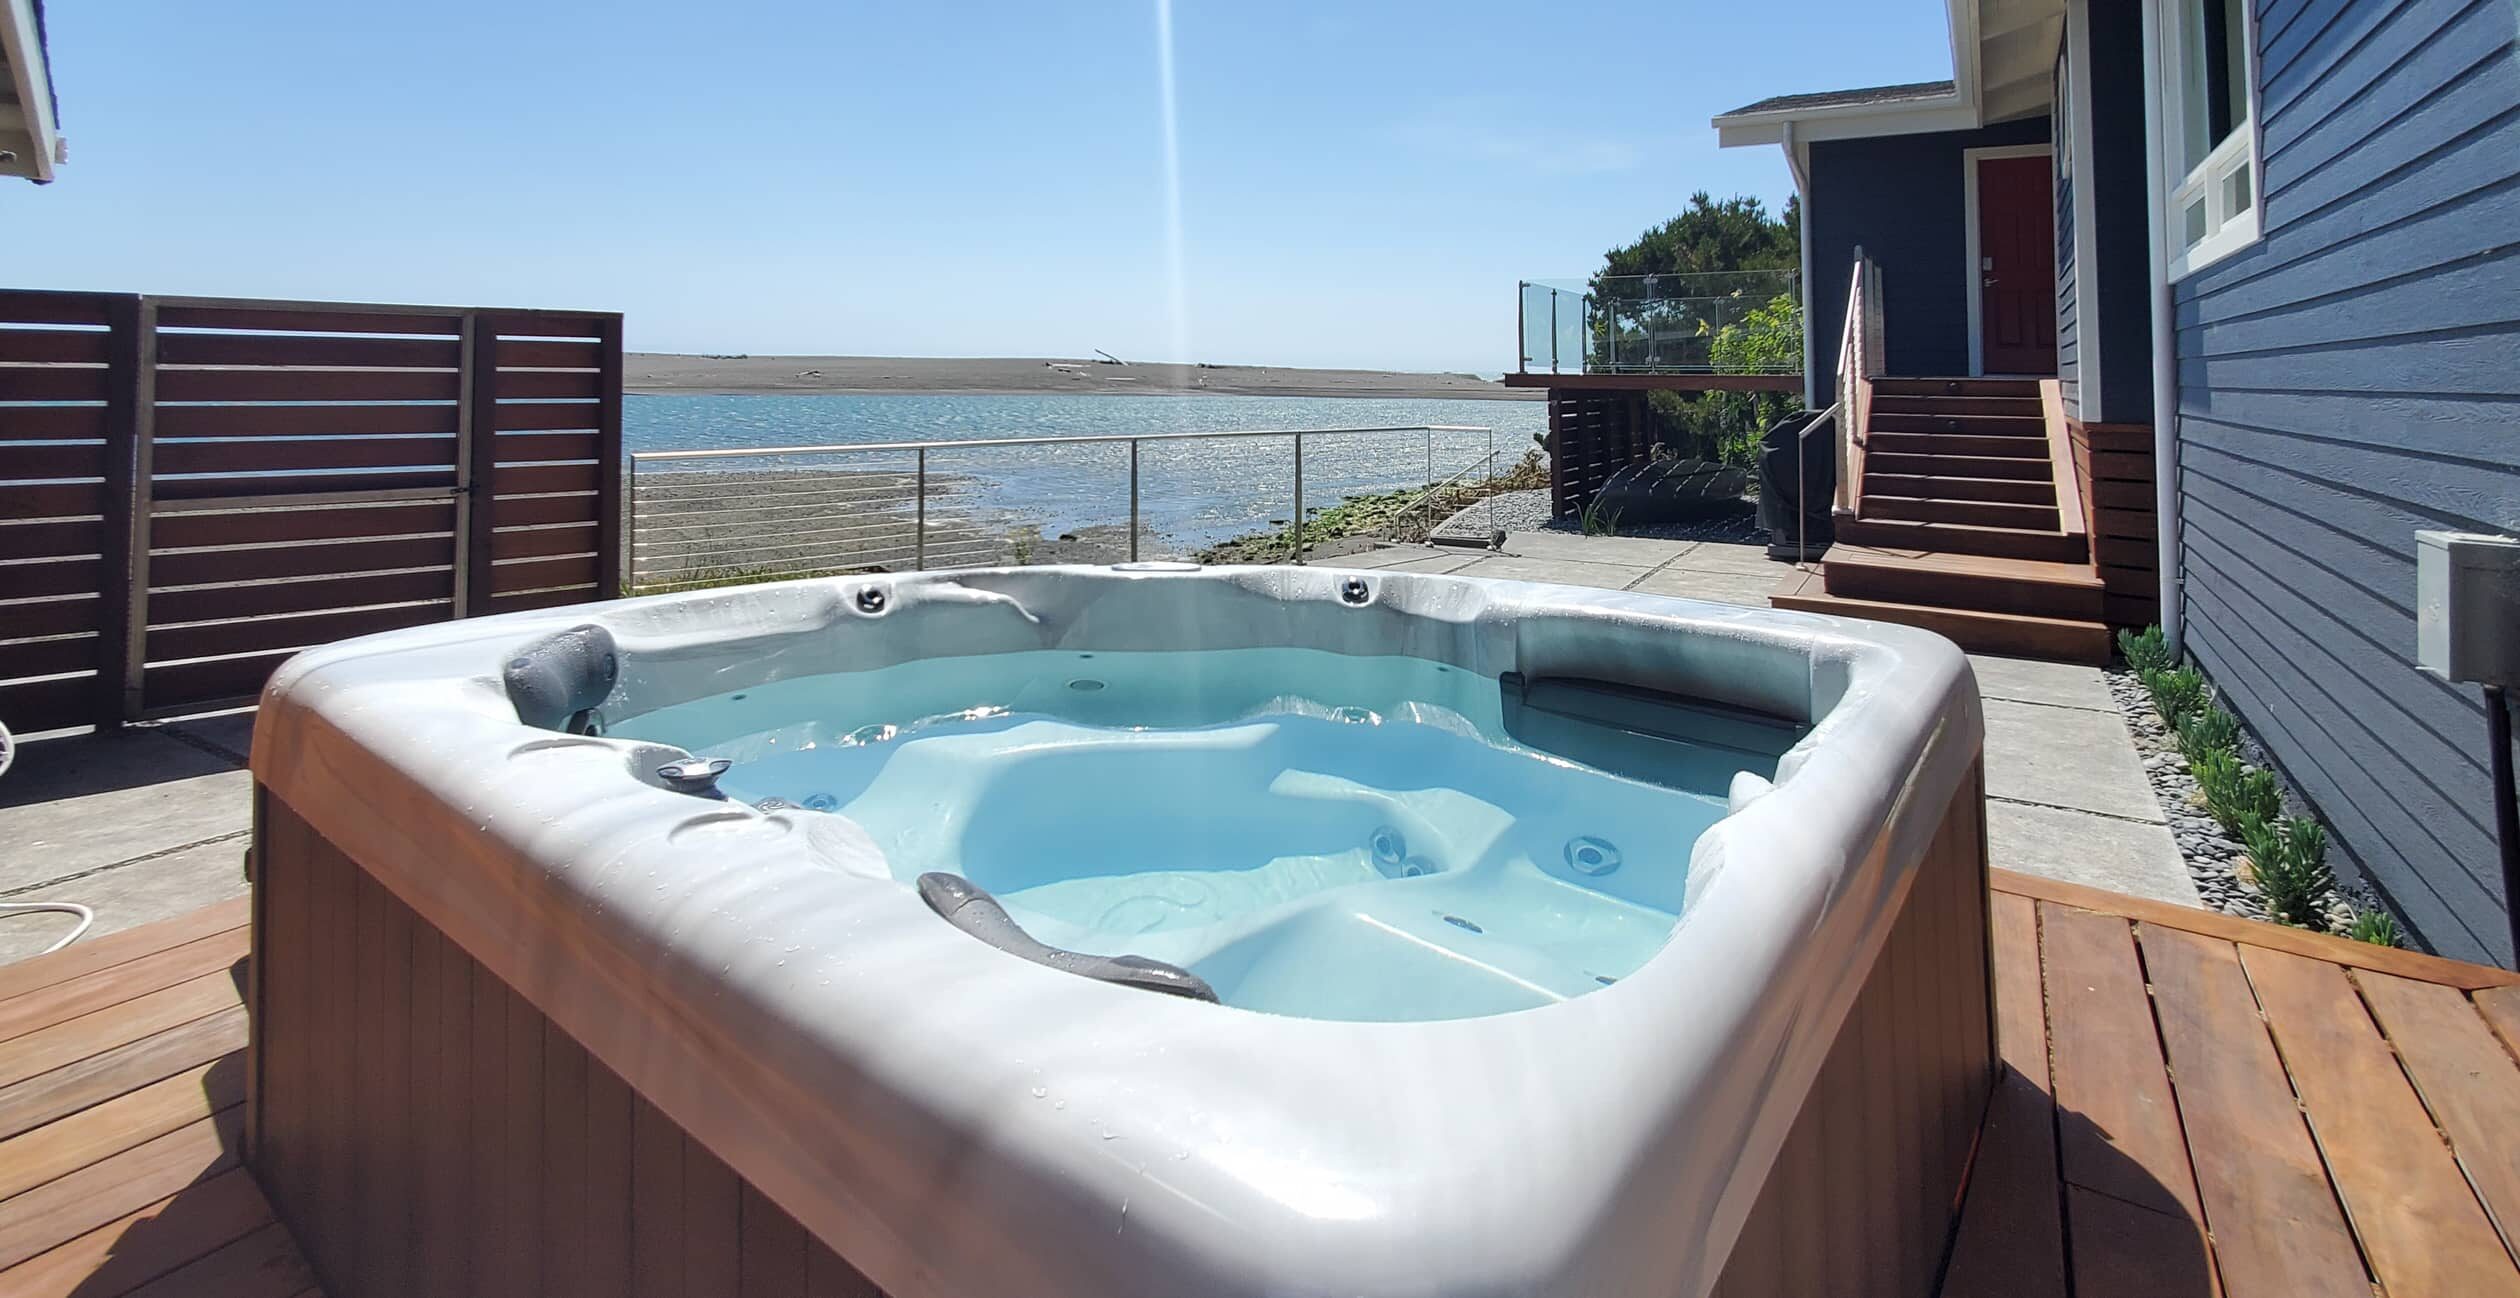 Hot tub at the Oceana House - Jenner Vacation Rental with Hot Tub